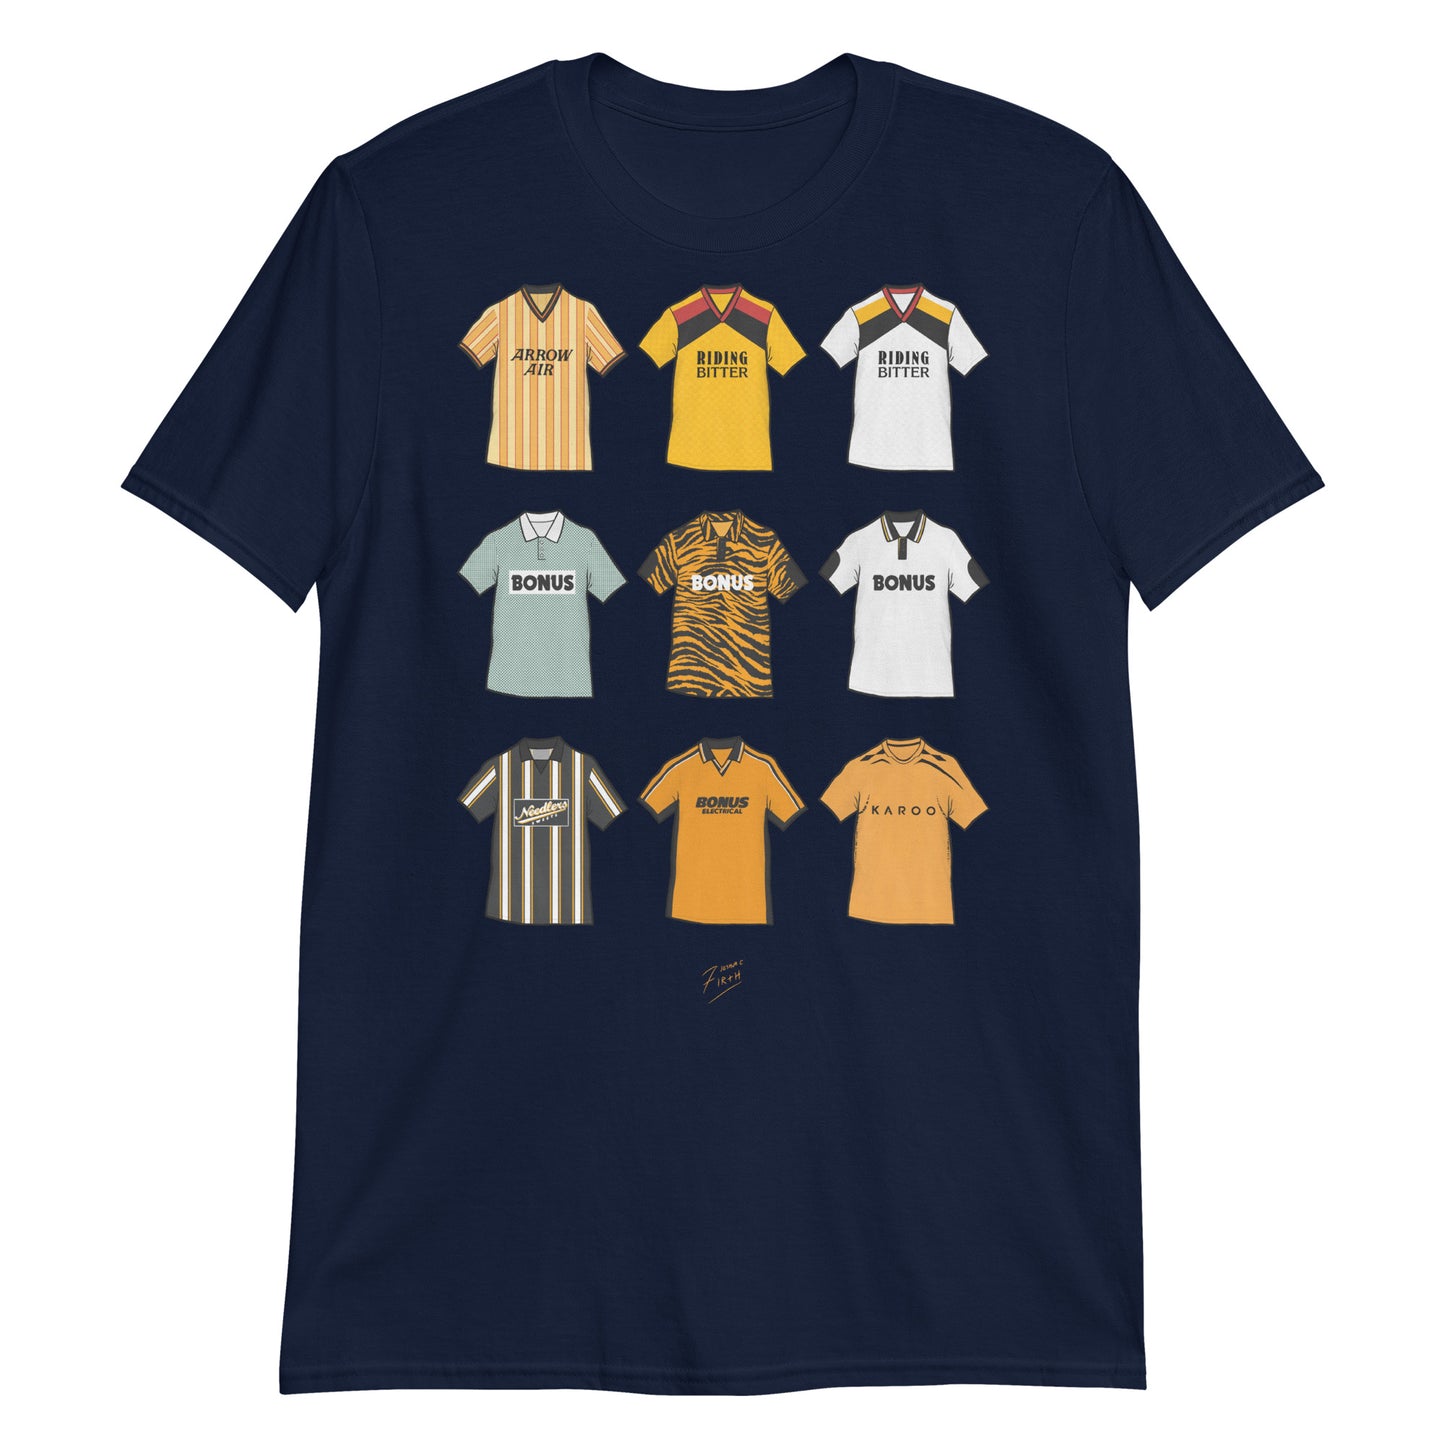 Navy Blue Hull City themed football t-shirt featuring artwork of some of the most iconic jerseys in the history of the club